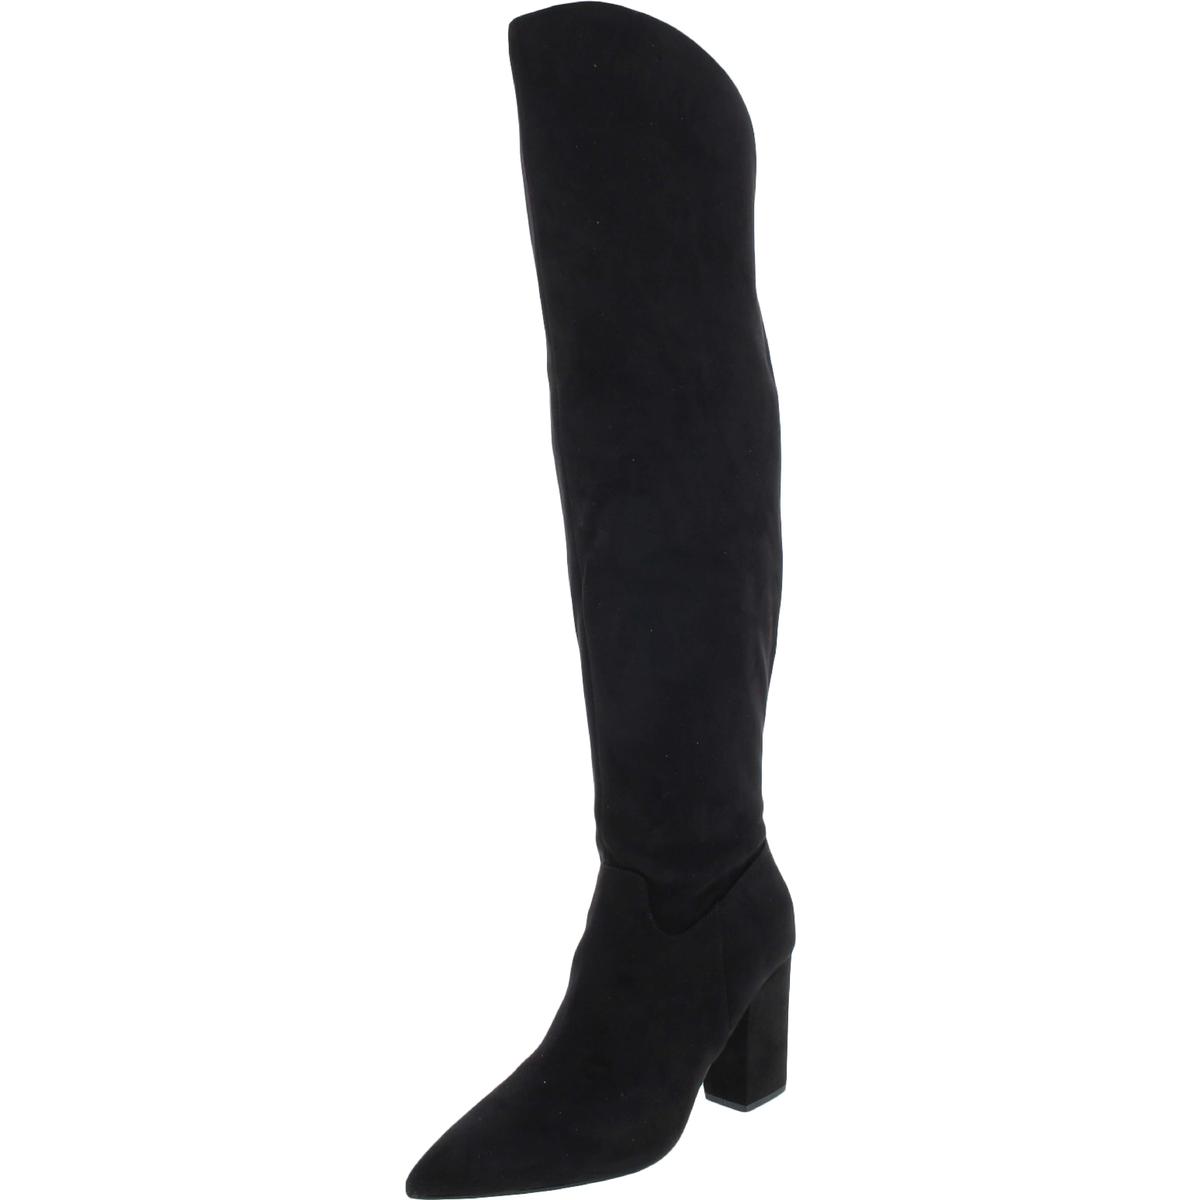 Nine West Go For It 2 Womens Faux Suede Block Heel Knee-High Boots